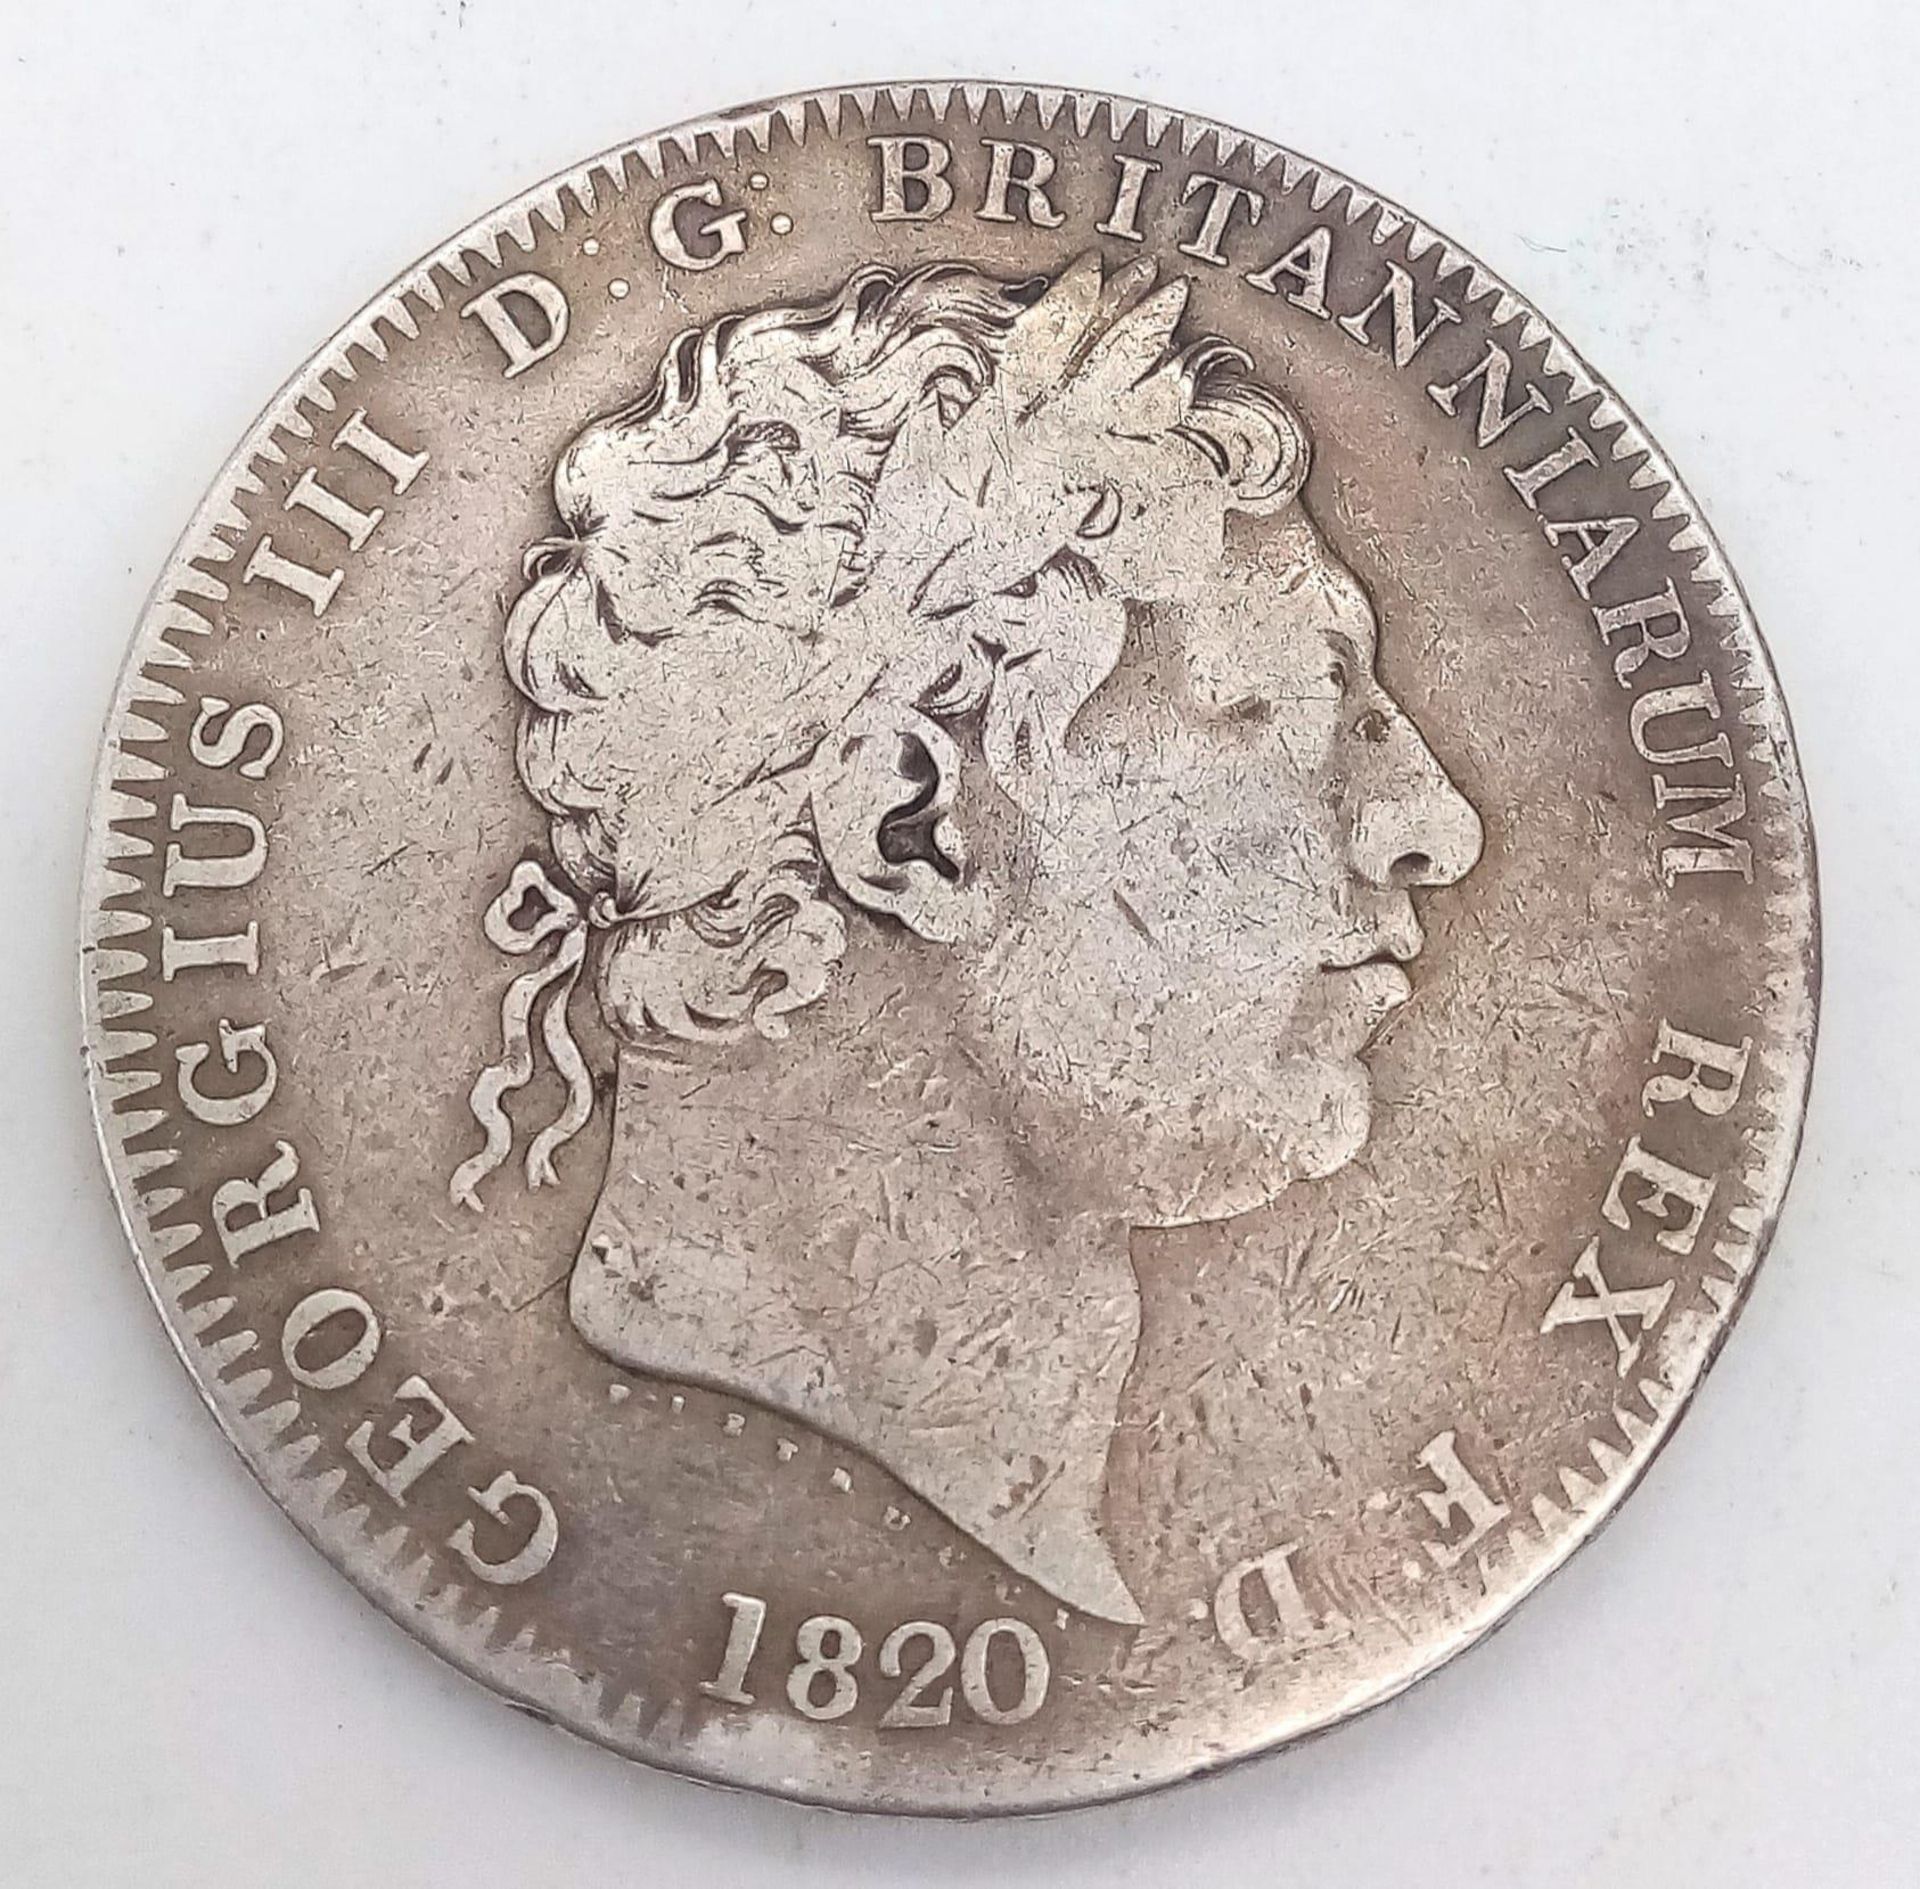 A GEORGE III SILVER CROWN 1820 WITH GEORGE SLAYING THE DRAGON ON THE REVERSE SIDE .